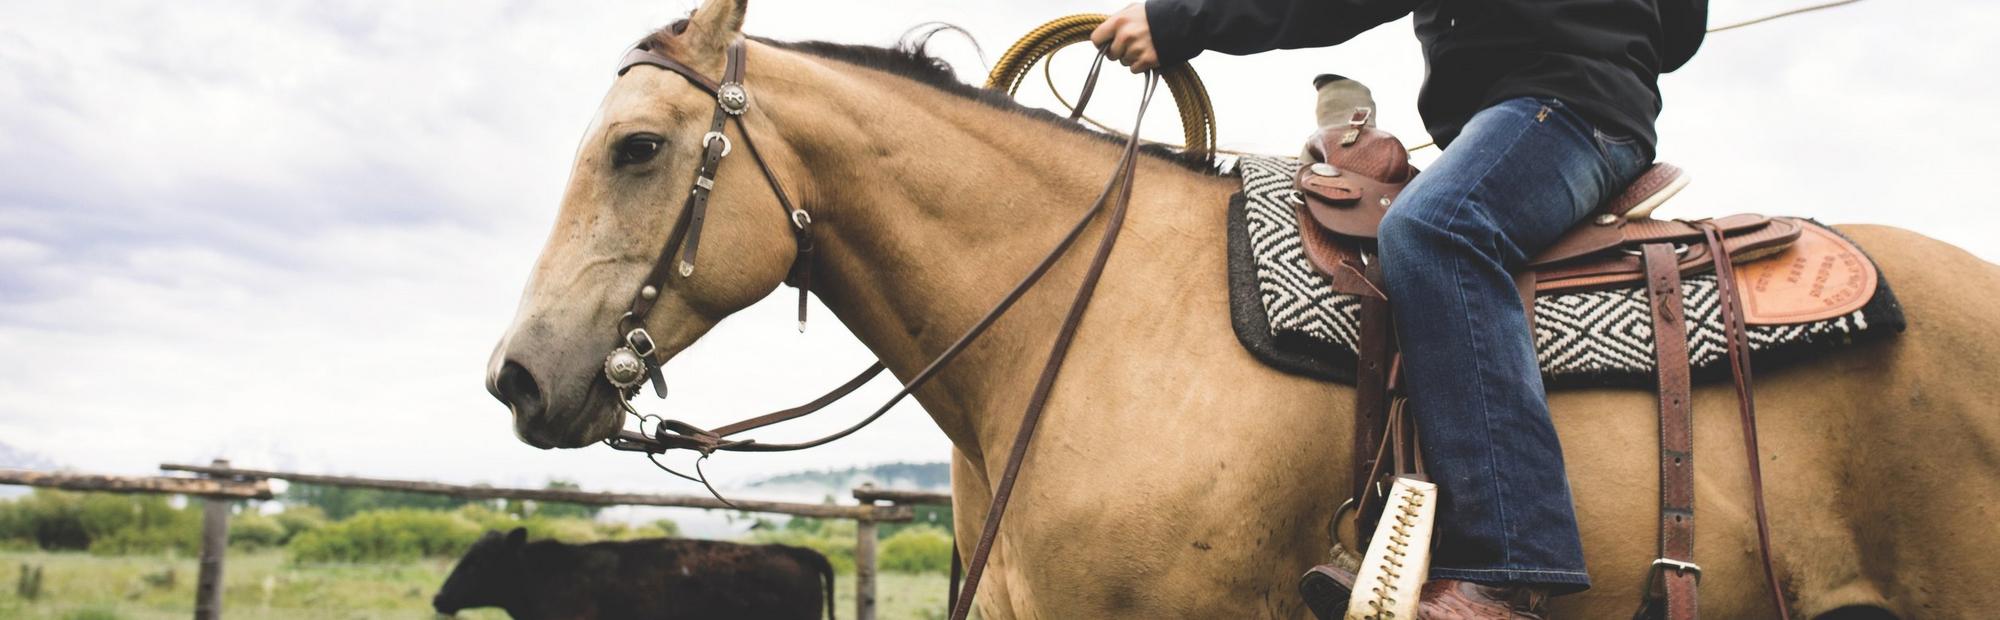 What Are the Different Types of Western Horseback Riding?